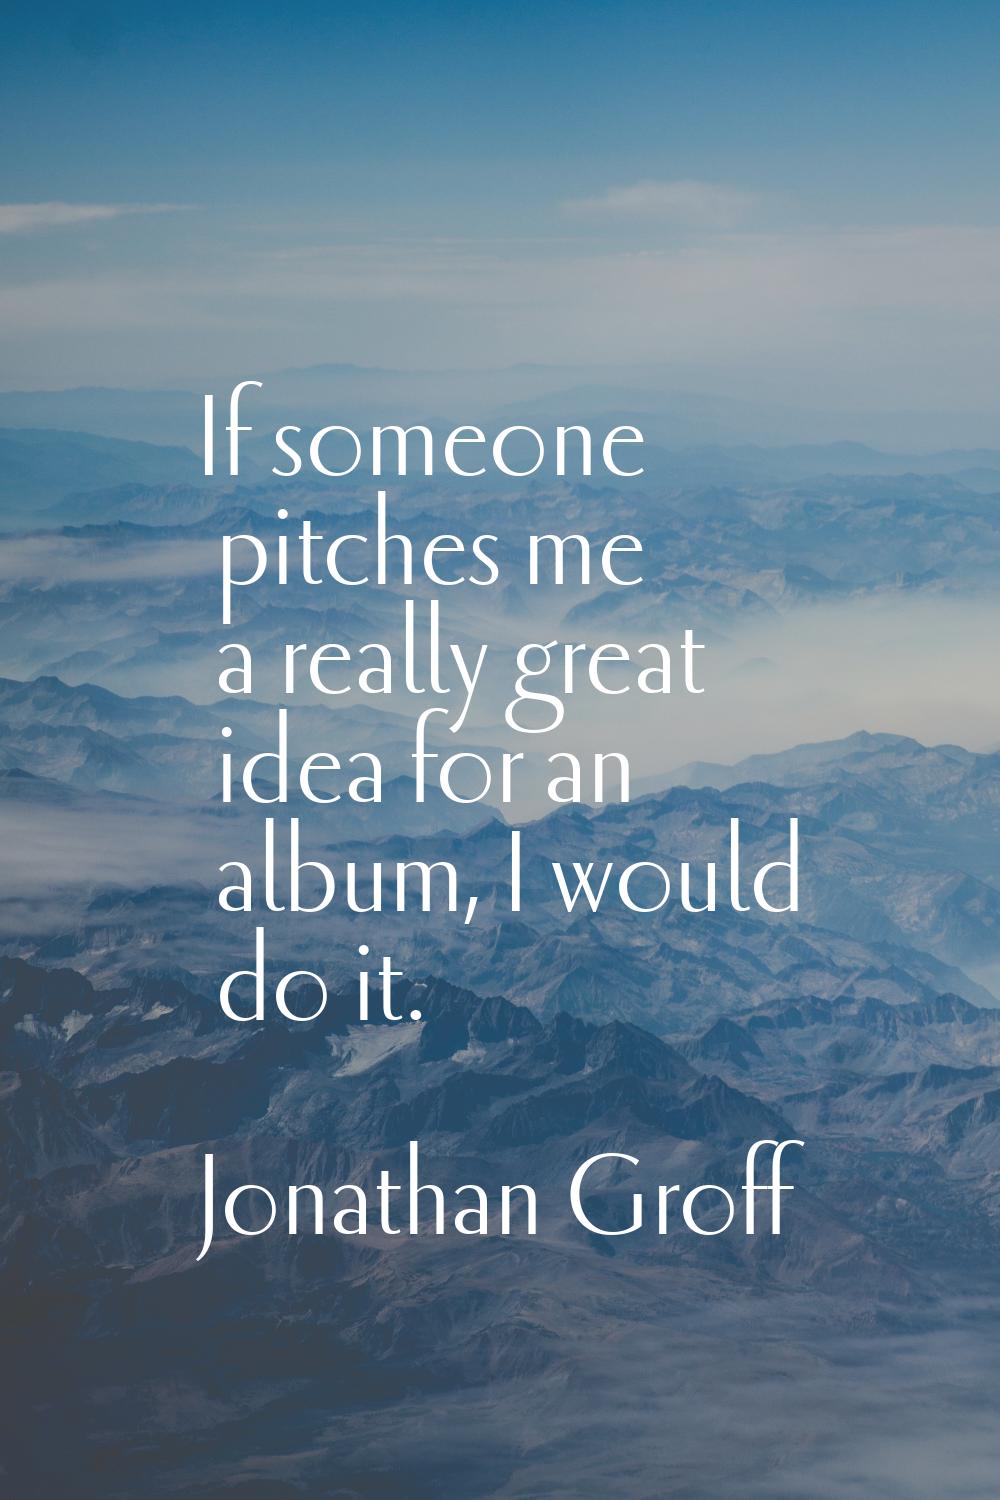 If someone pitches me a really great idea for an album, I would do it.